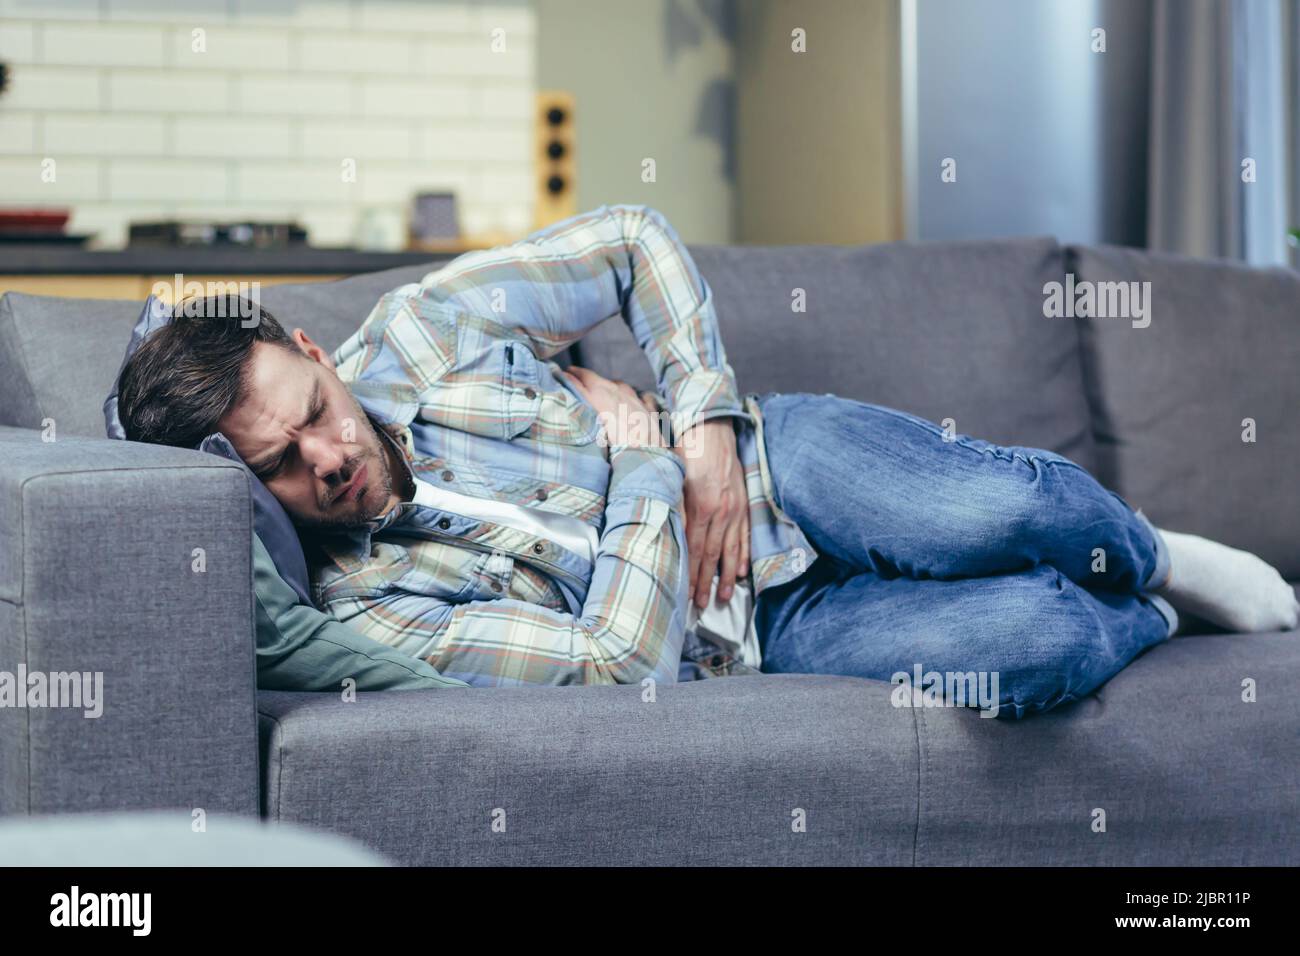 The sick man lying on the couch at home has severe abdominal pain Stock Photo